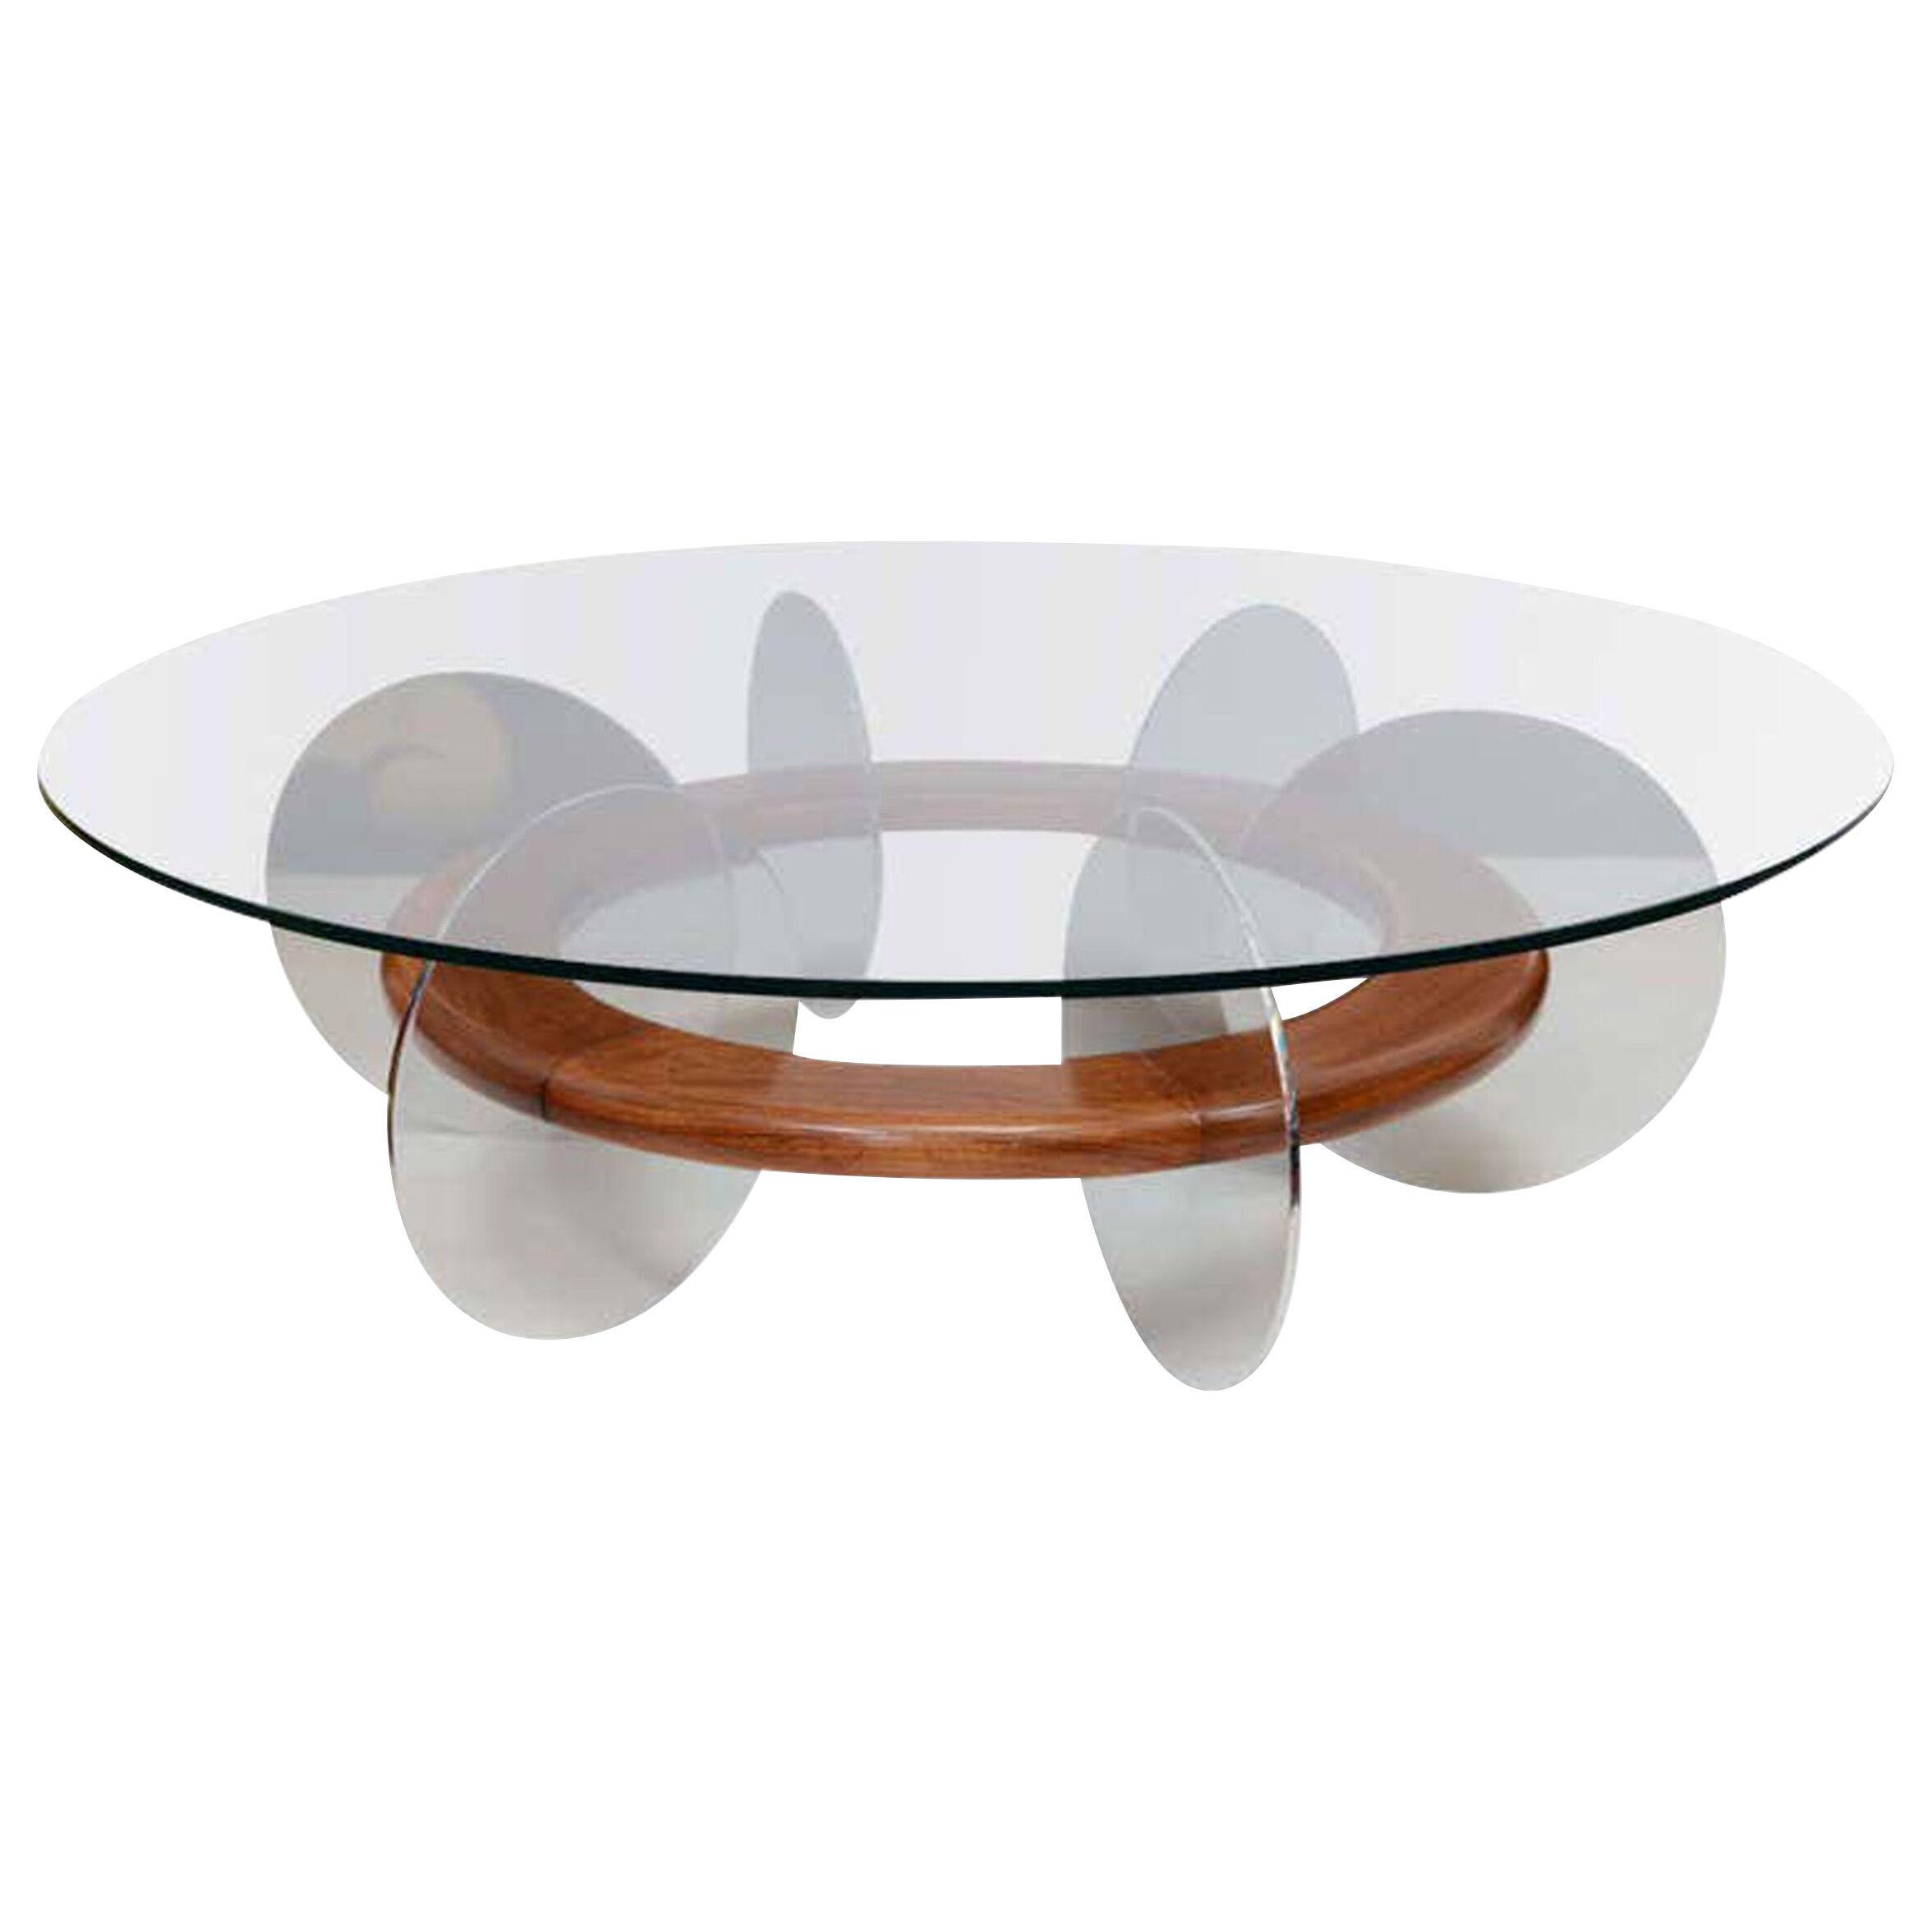 Round Stainless Steel disks and wood Coffee Table Design by "AUBÉRY"